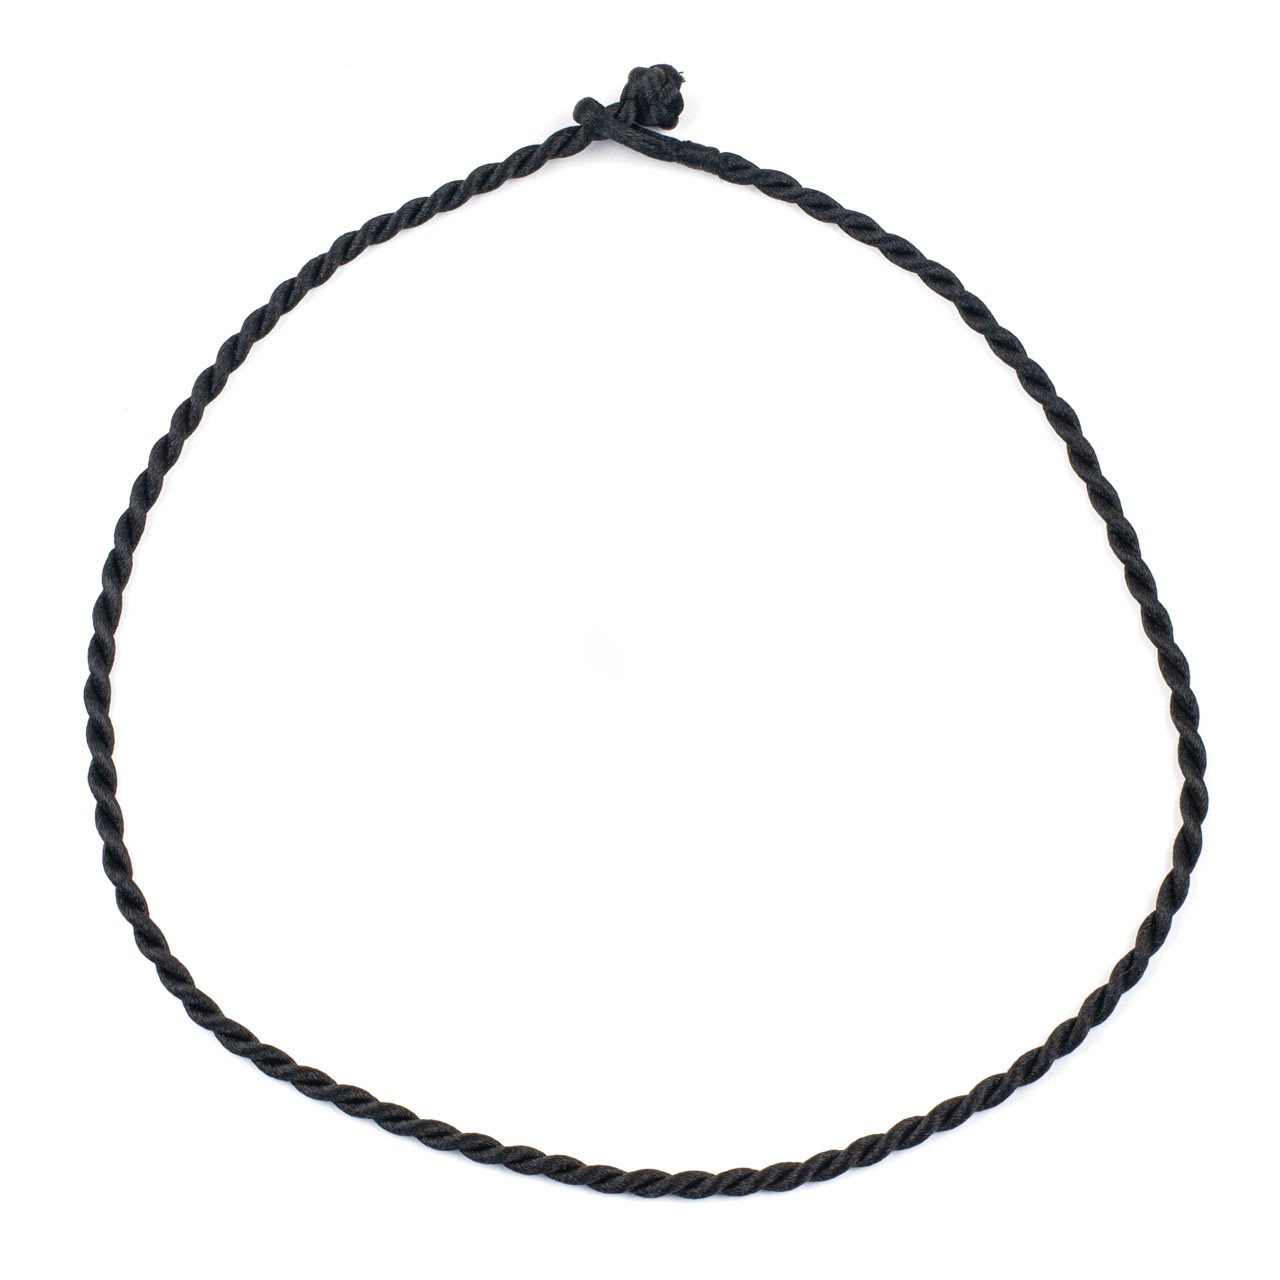 Braided Satin Nylon Cord Necklace - Black 5mm Cord 18 with Knot Closure